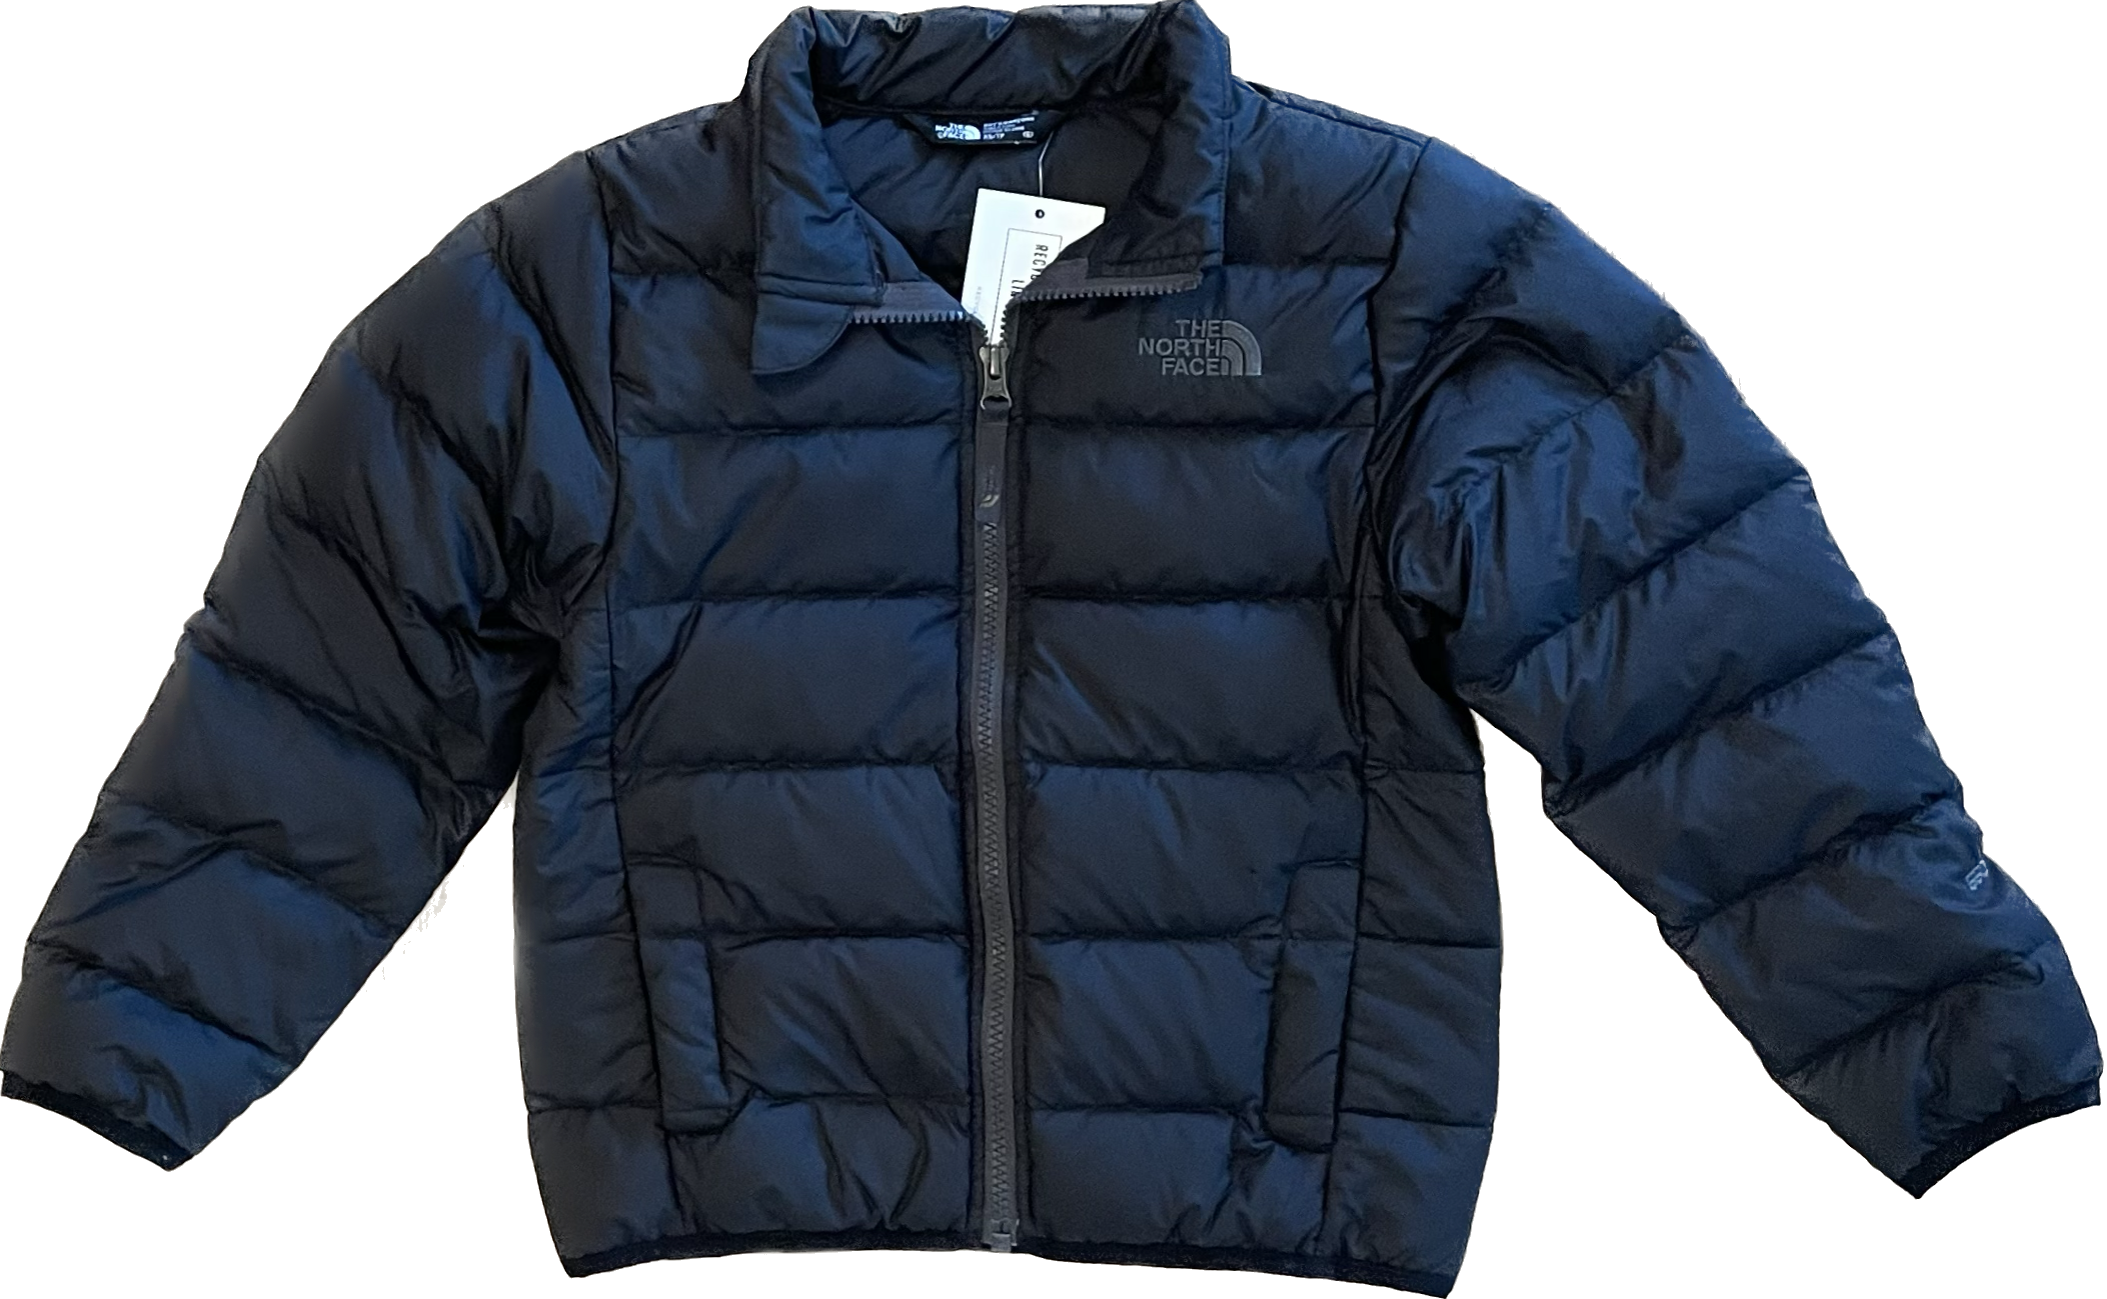 The North Face Puffer Jacket, Black Boys Size XS (6)